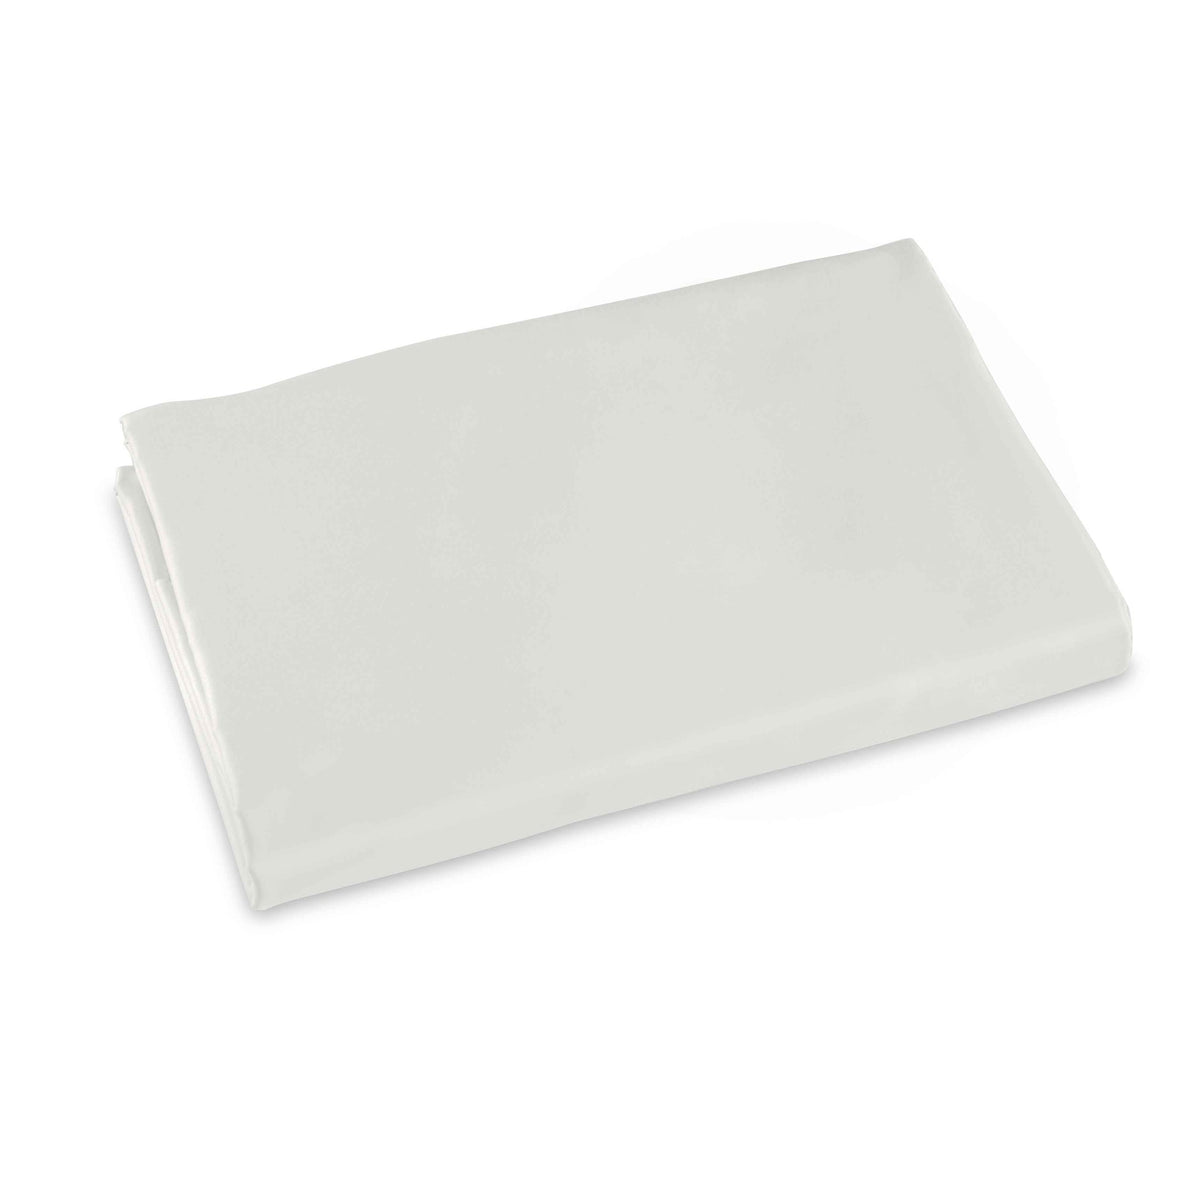 Clear Image of Signoria Tuscan Dreams Fitted Sheet in Pearl Color